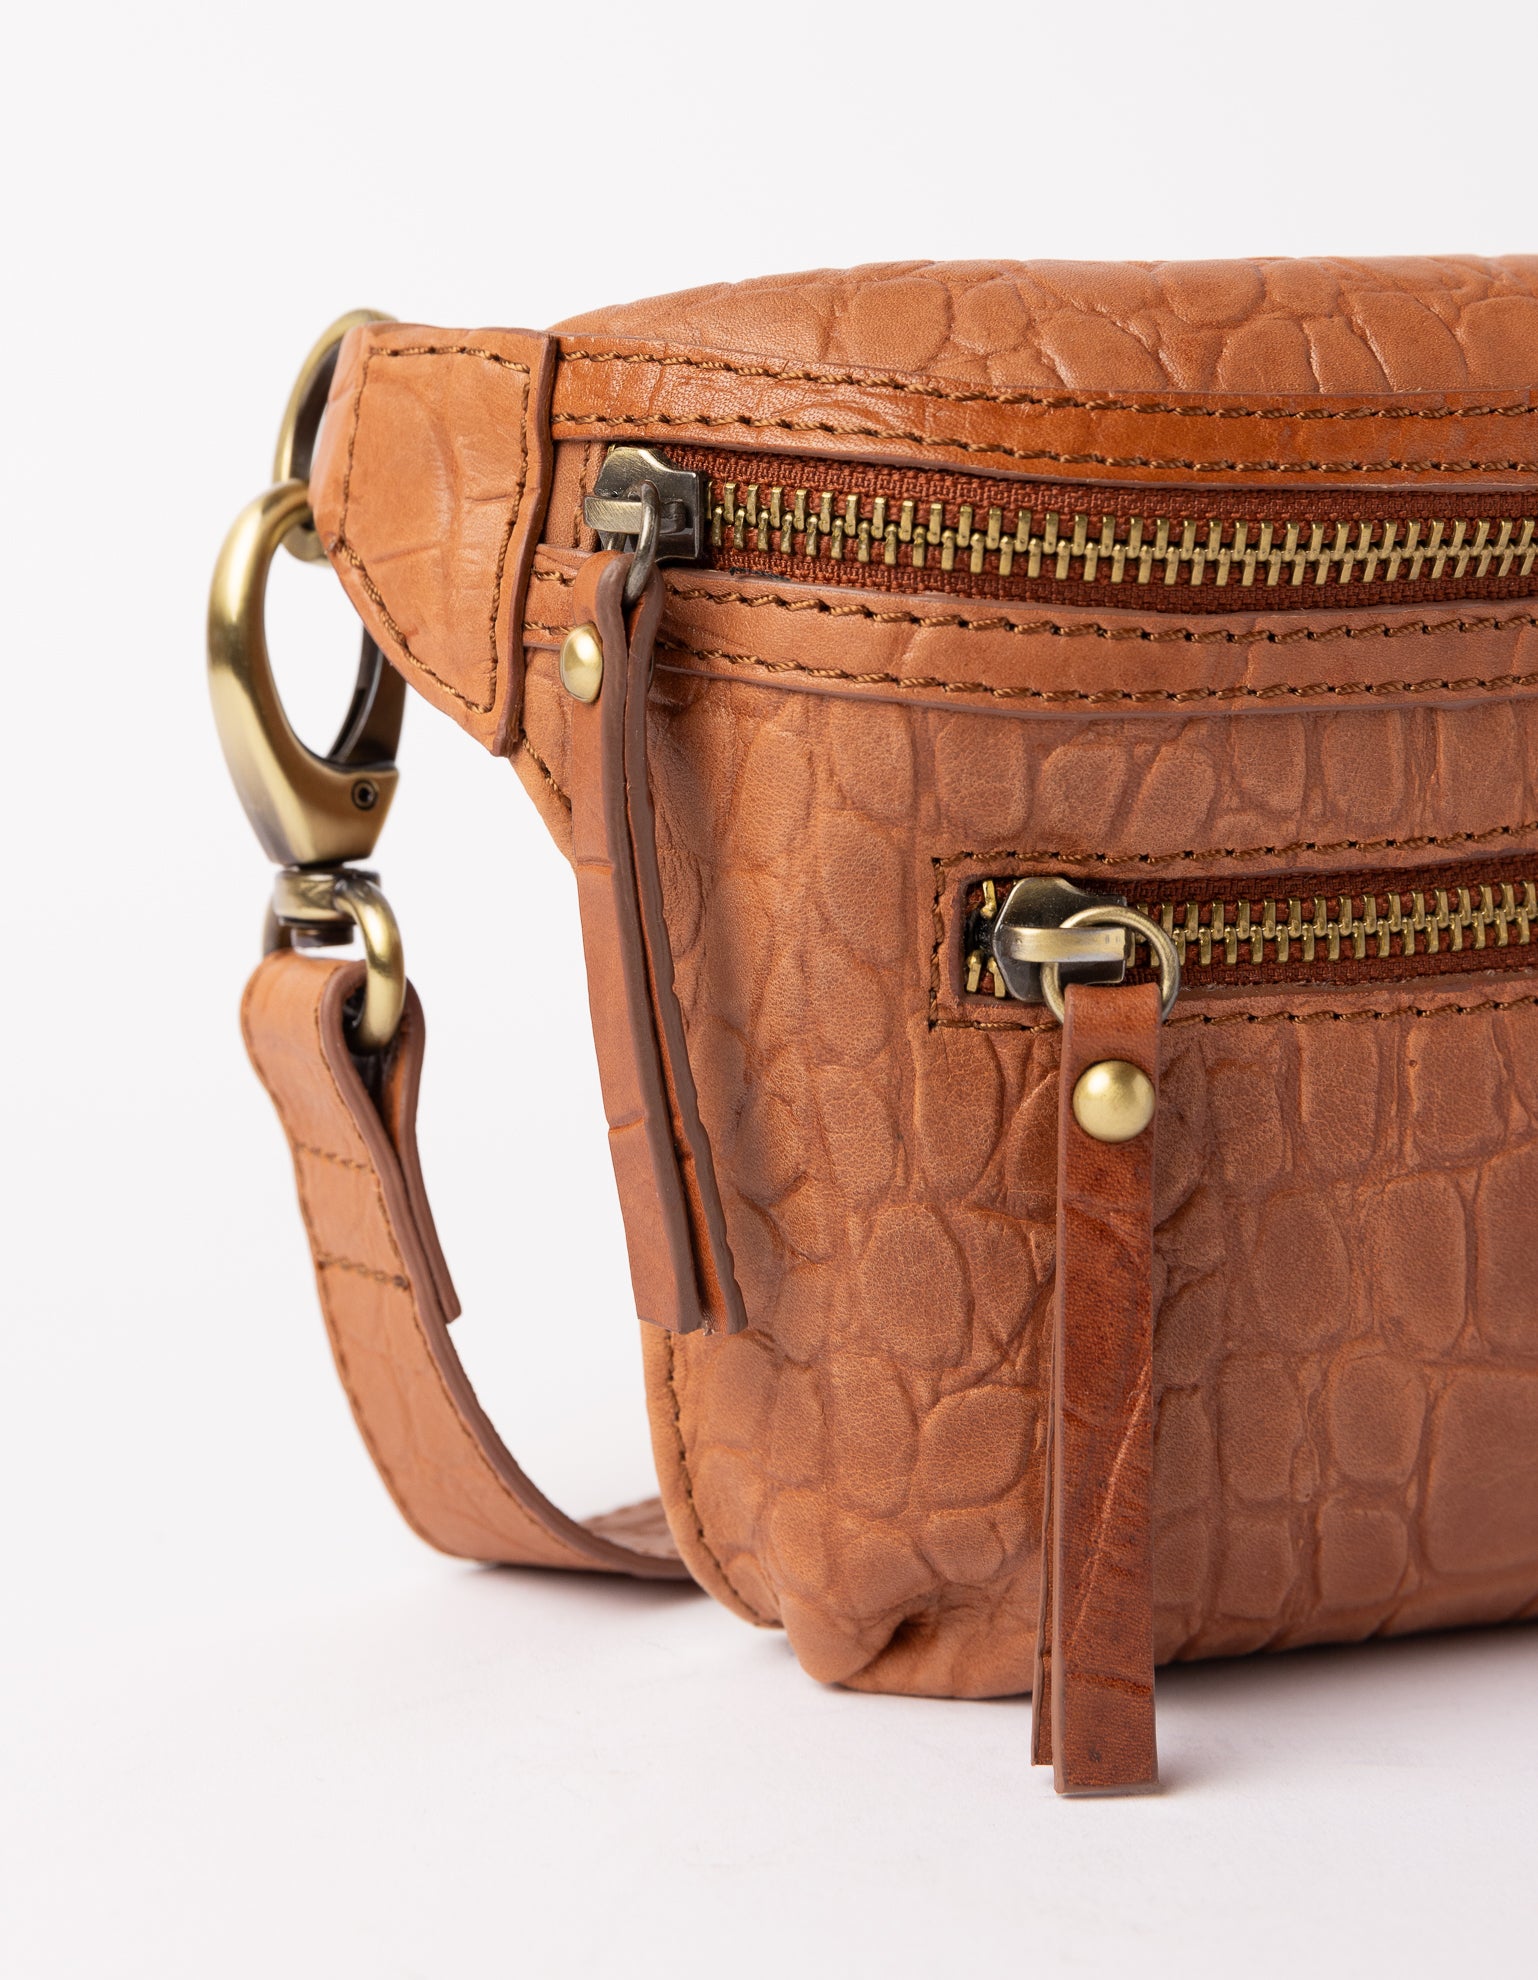 Beck's Bum Bag Wild Oak Soft Grain Croco Leather. Fanny pack with adjustable strap. Product details close-up image.